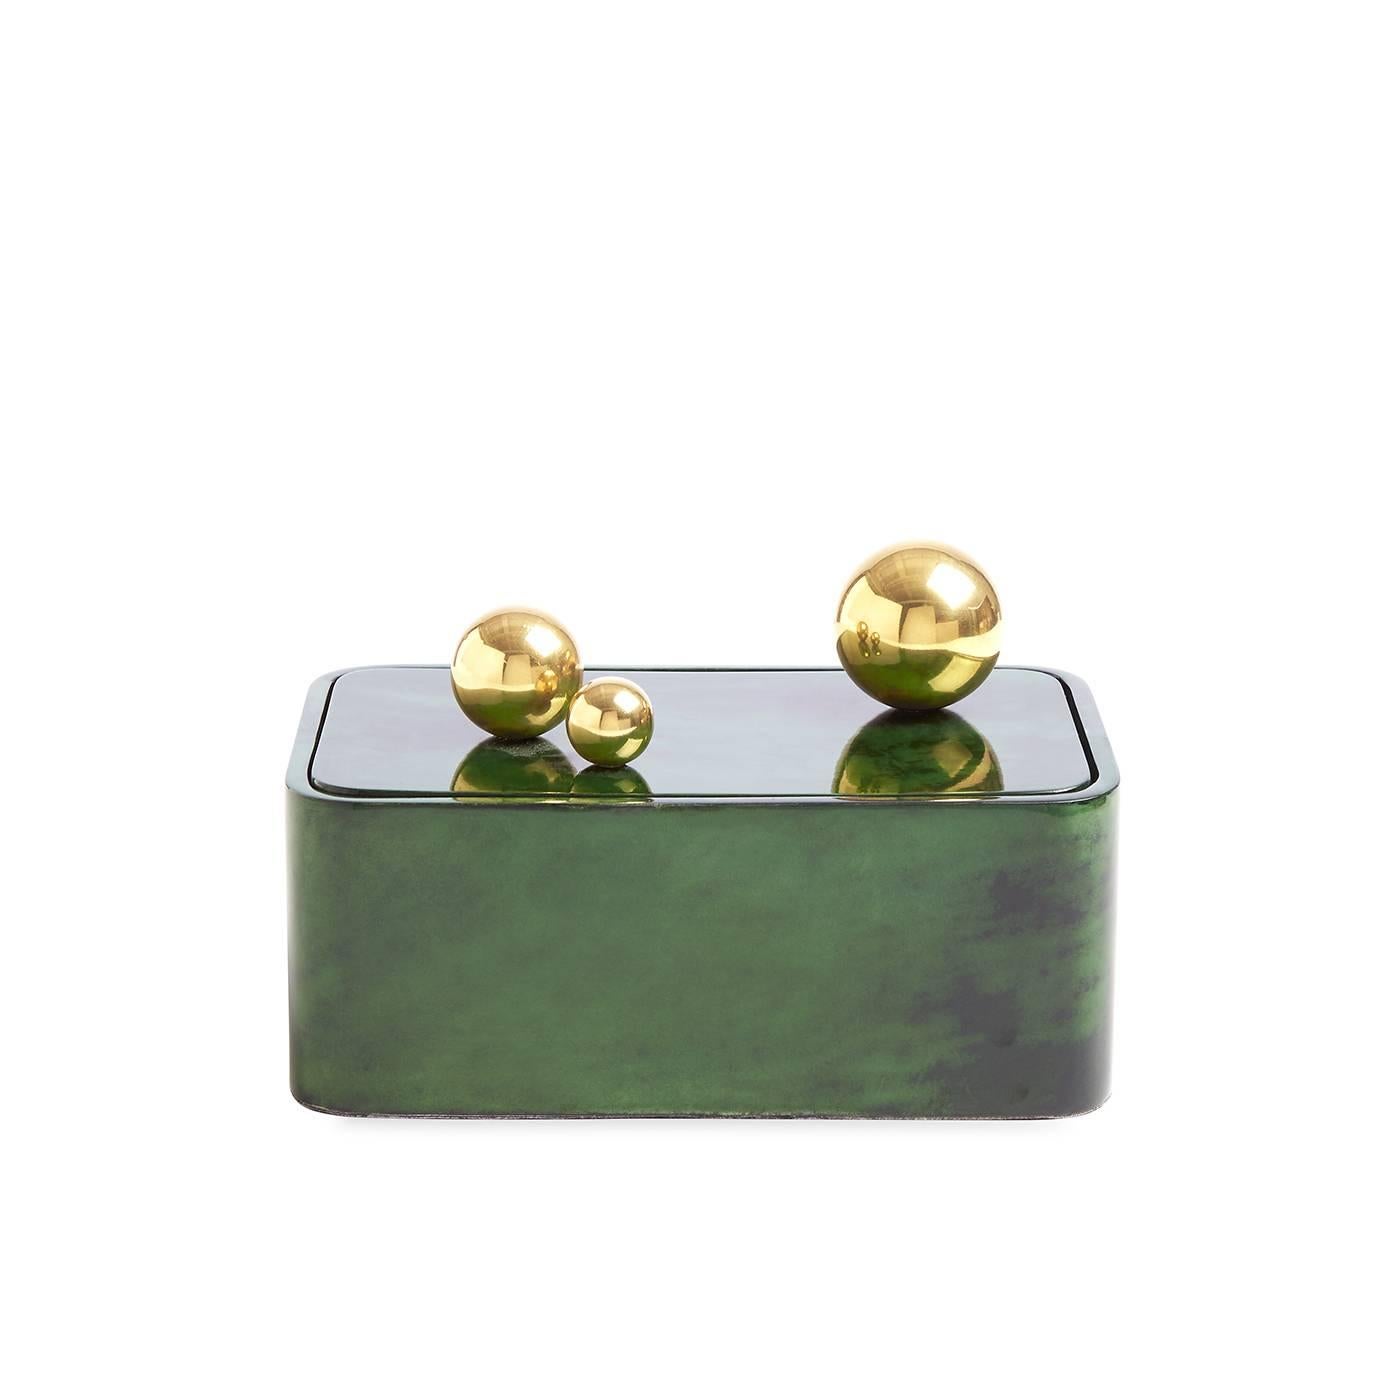 Lacquered goatskin meets polished brass spheres in our elementally simple Trocadero Box. Jonathan aimed to pare down basic shapes for a box that makes the most minimal gestures functional and dynamic. Generously sized and uncompromisingly glamorous,